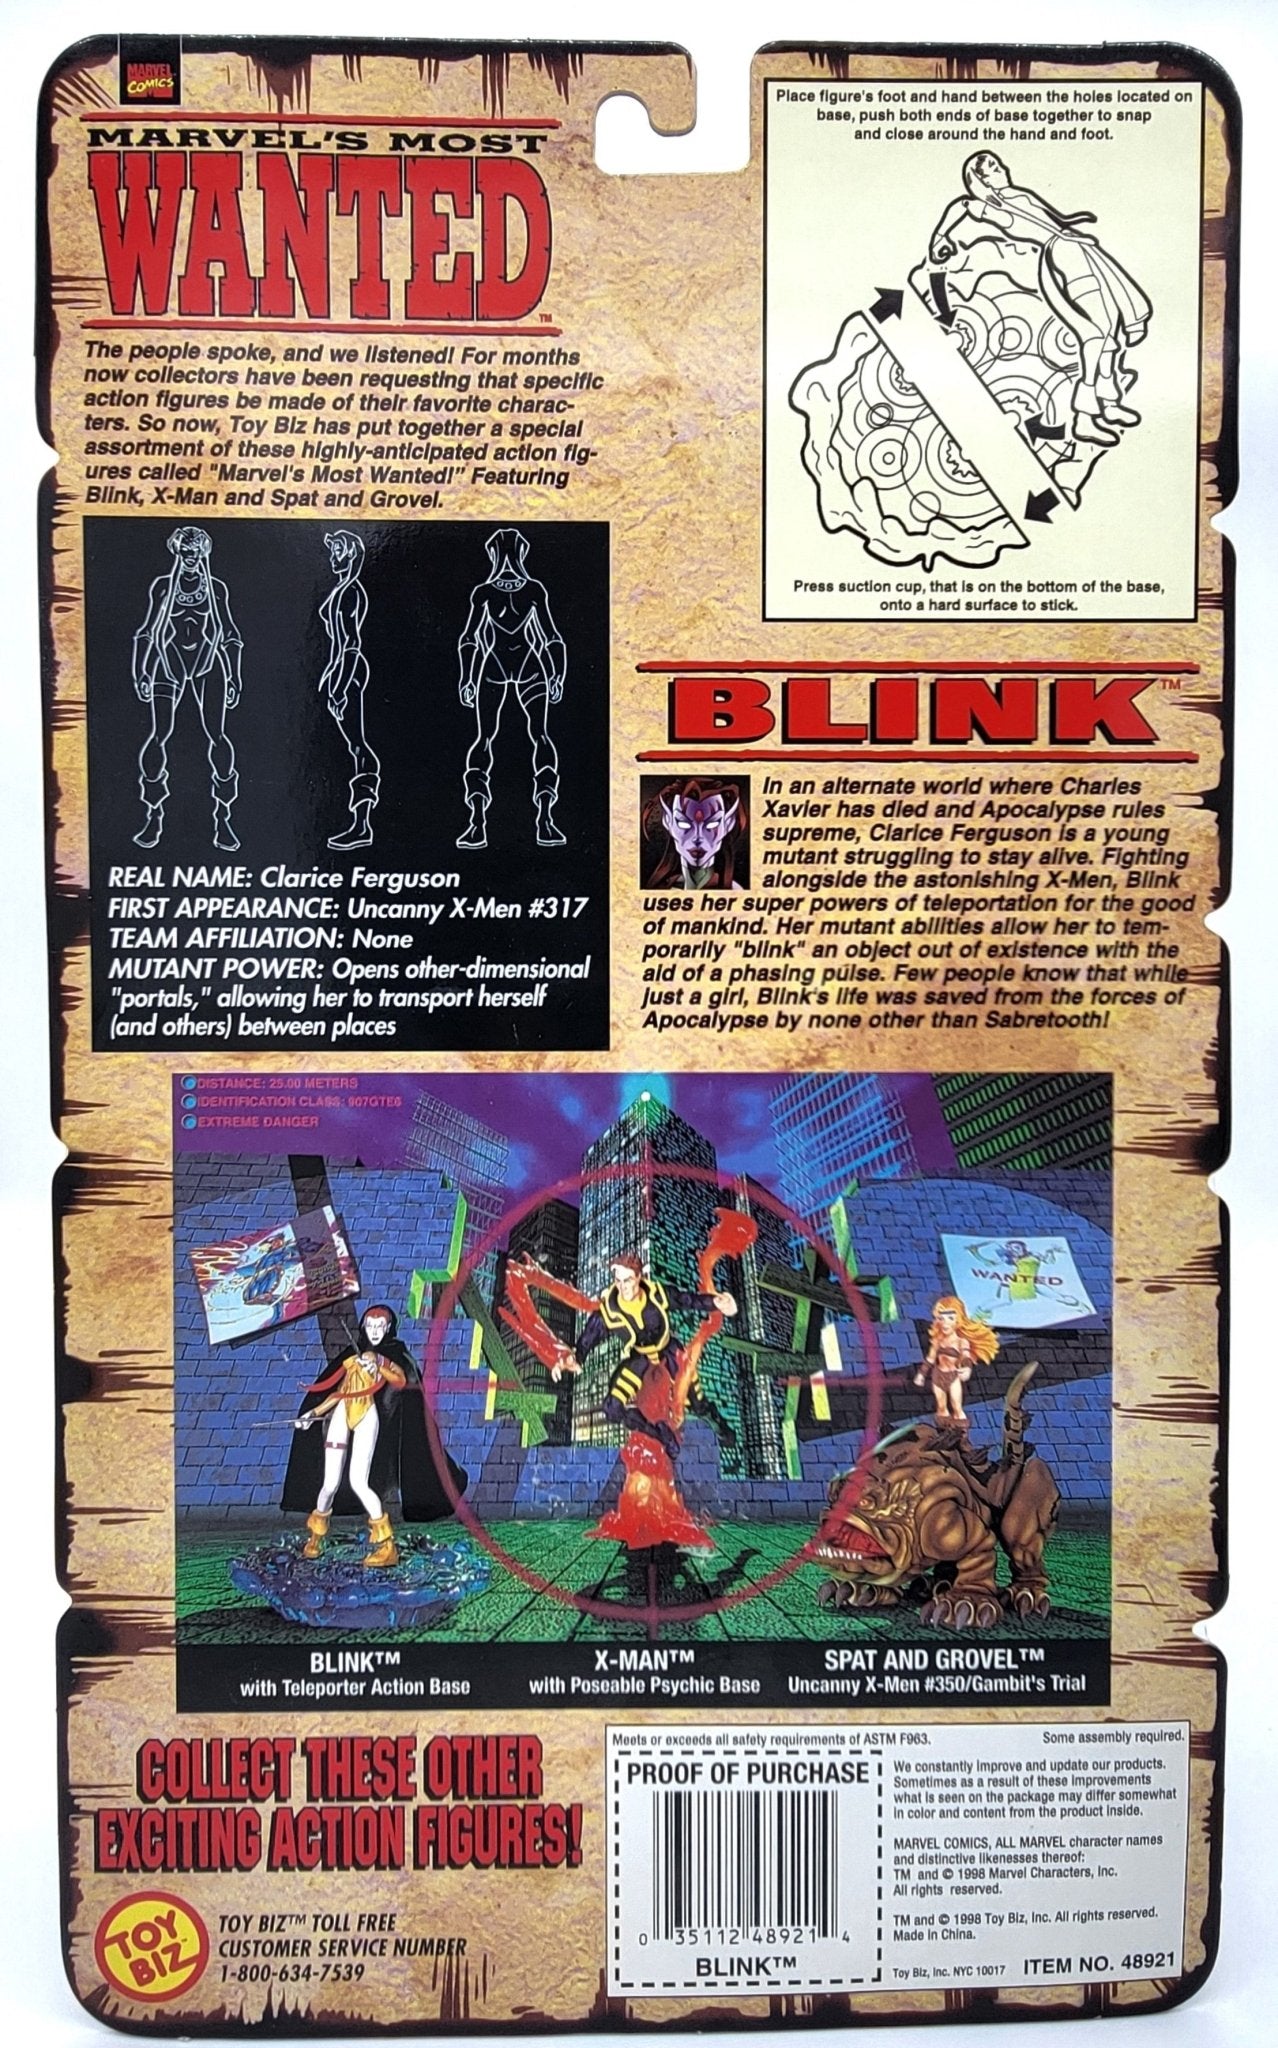 Toy Biz - Toy Biz | Marvel's Most Wanted - Blink 1998 | Marvel Collector Edition - Vintage Mavel Action Figure - Action Figures - Steady Bunny Shop